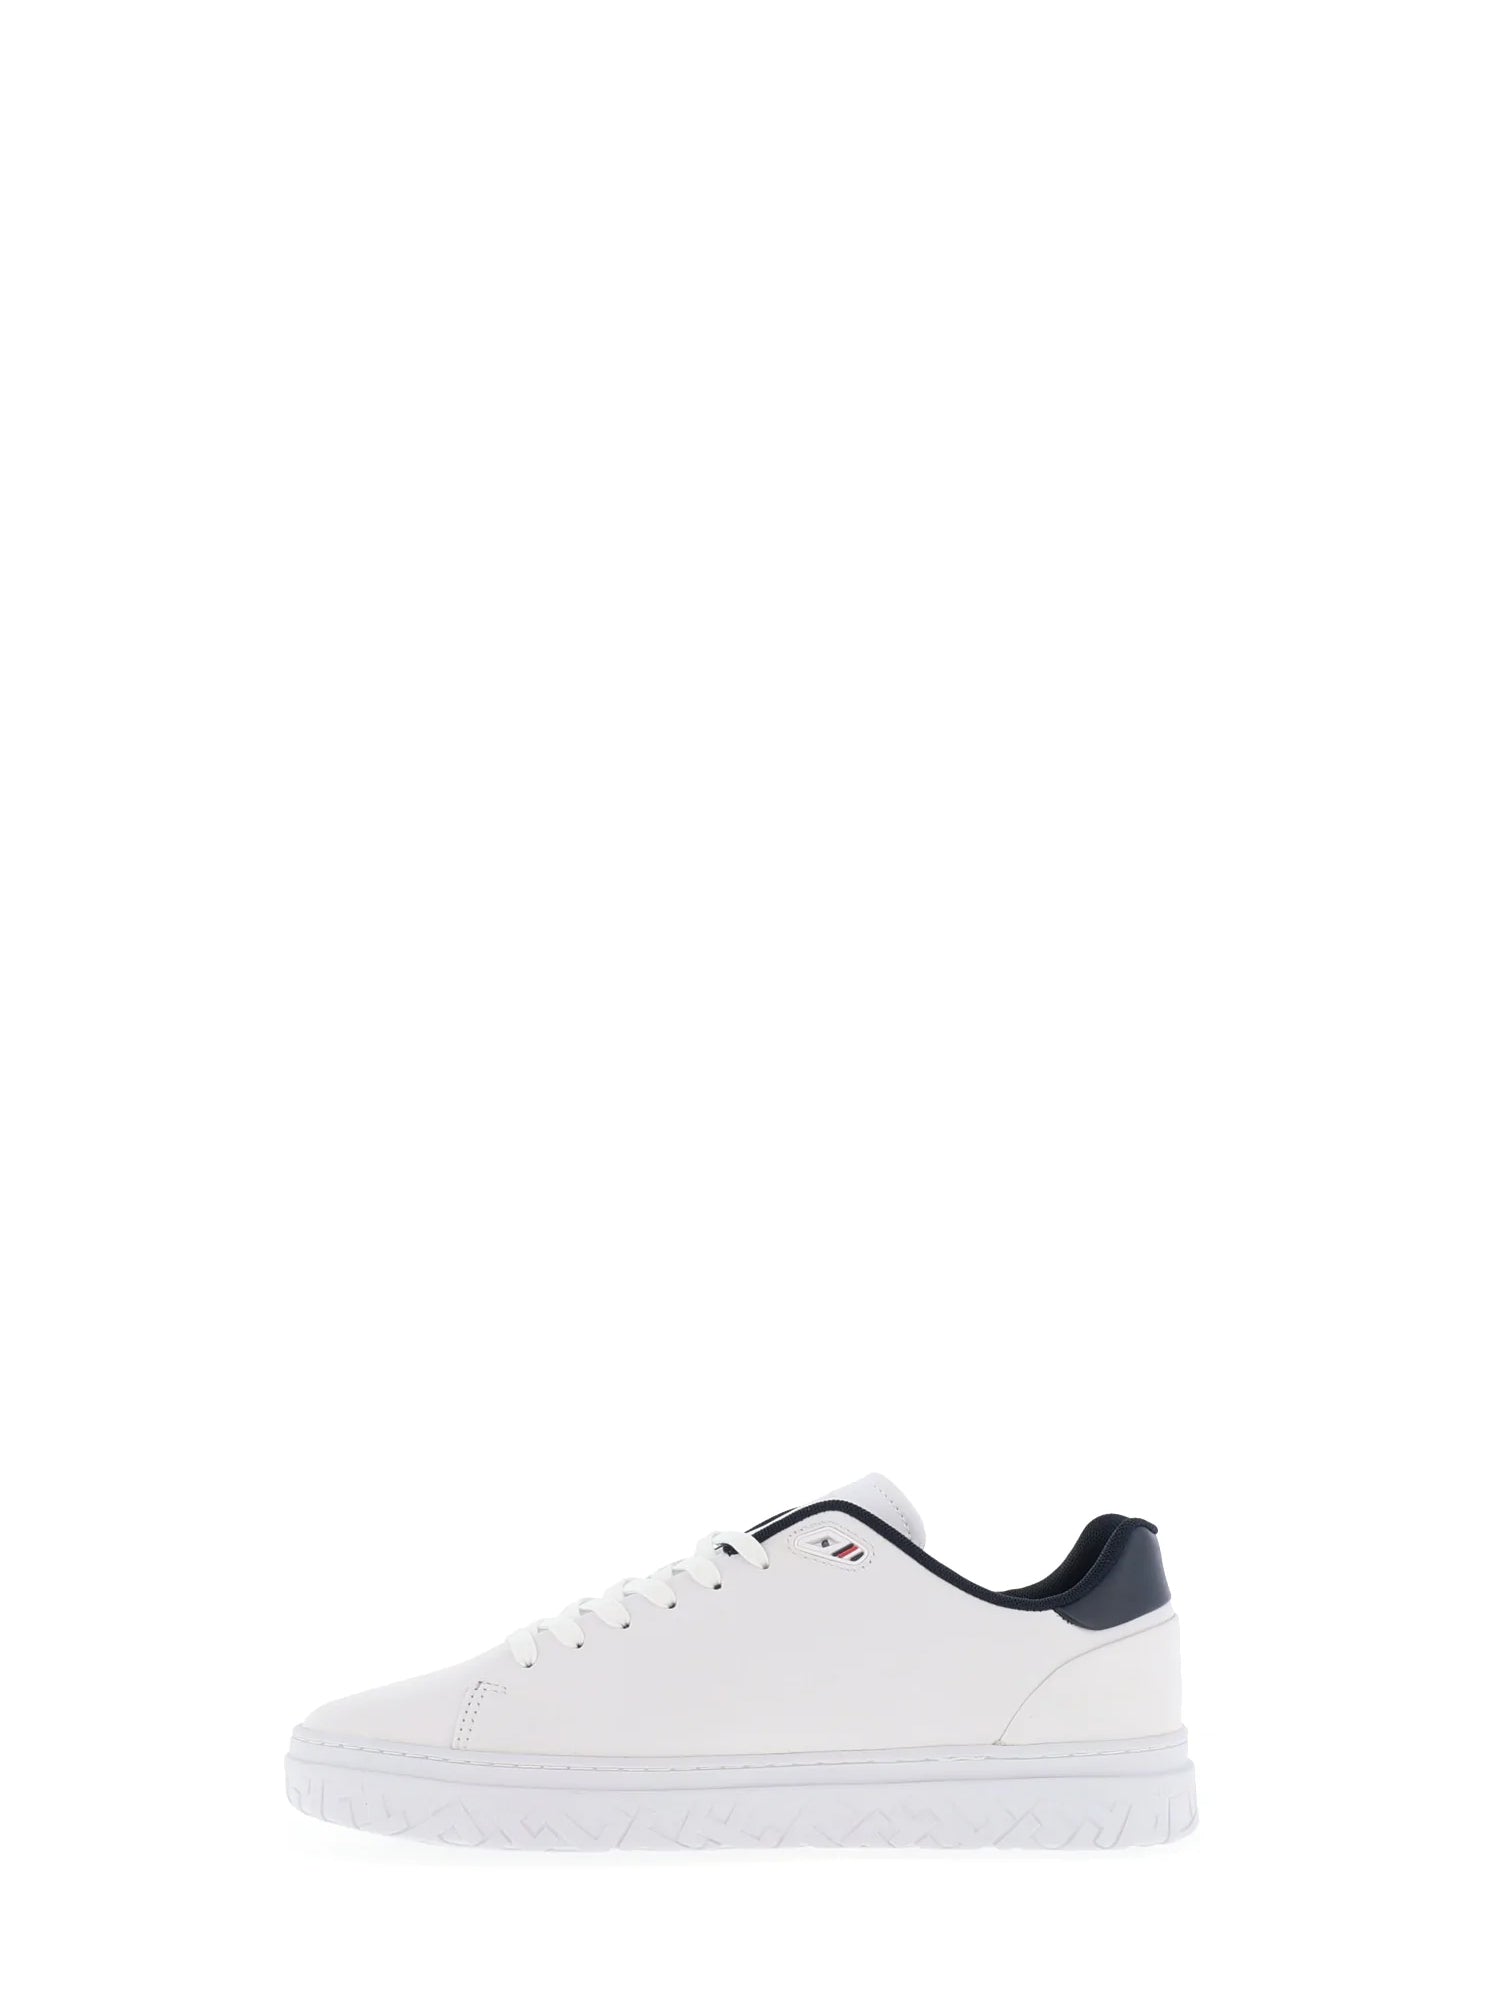 TOMMY HILFIGER SHOES SNEAKERS BASSE MODERN ICONIC COURT BIANCO